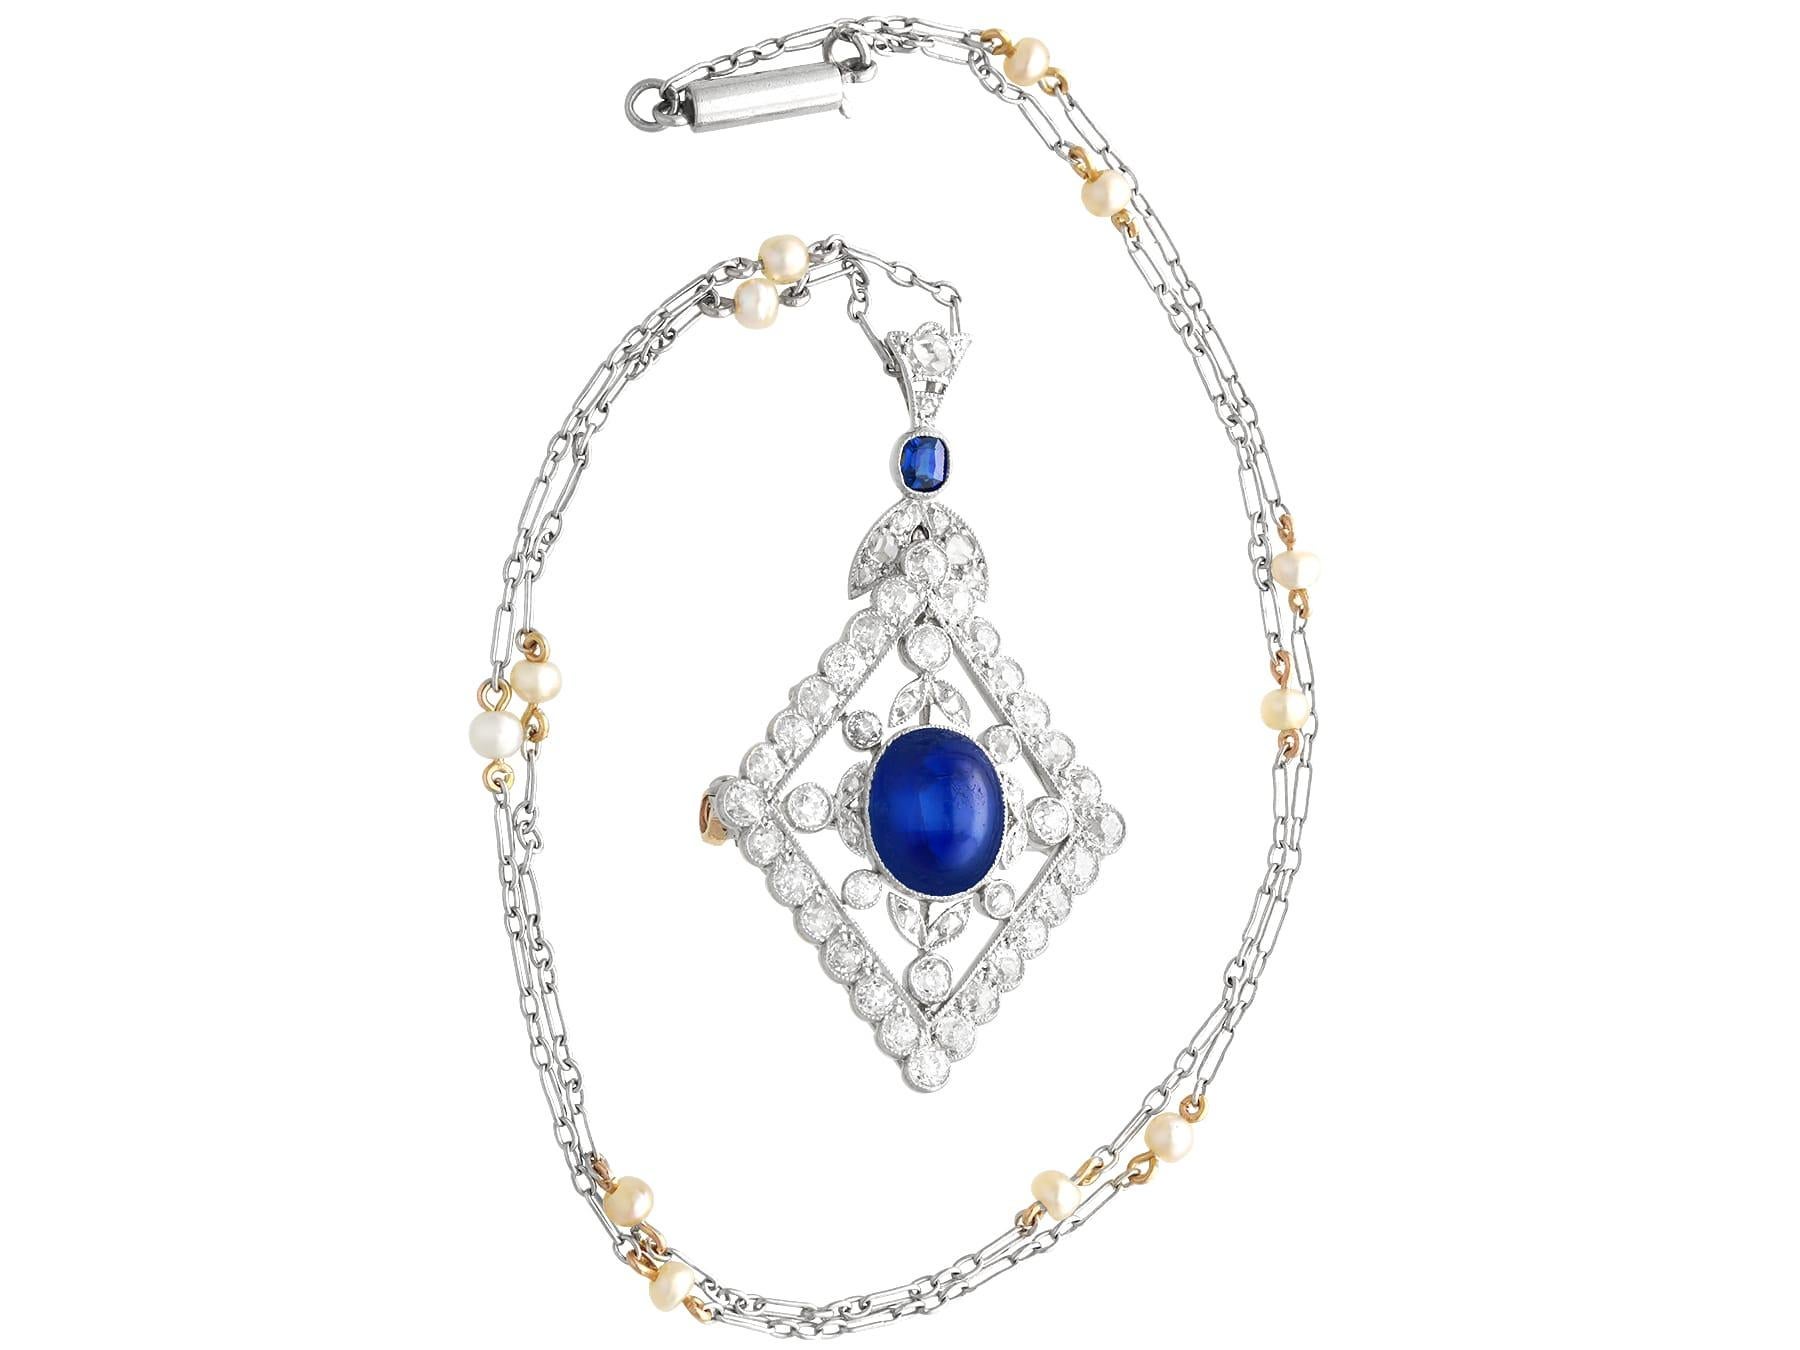 Cabochon 4.40 Carat Basaltic Sapphire 3.14 Carat Diamond and Pearl Pendant / Brooch For Sale